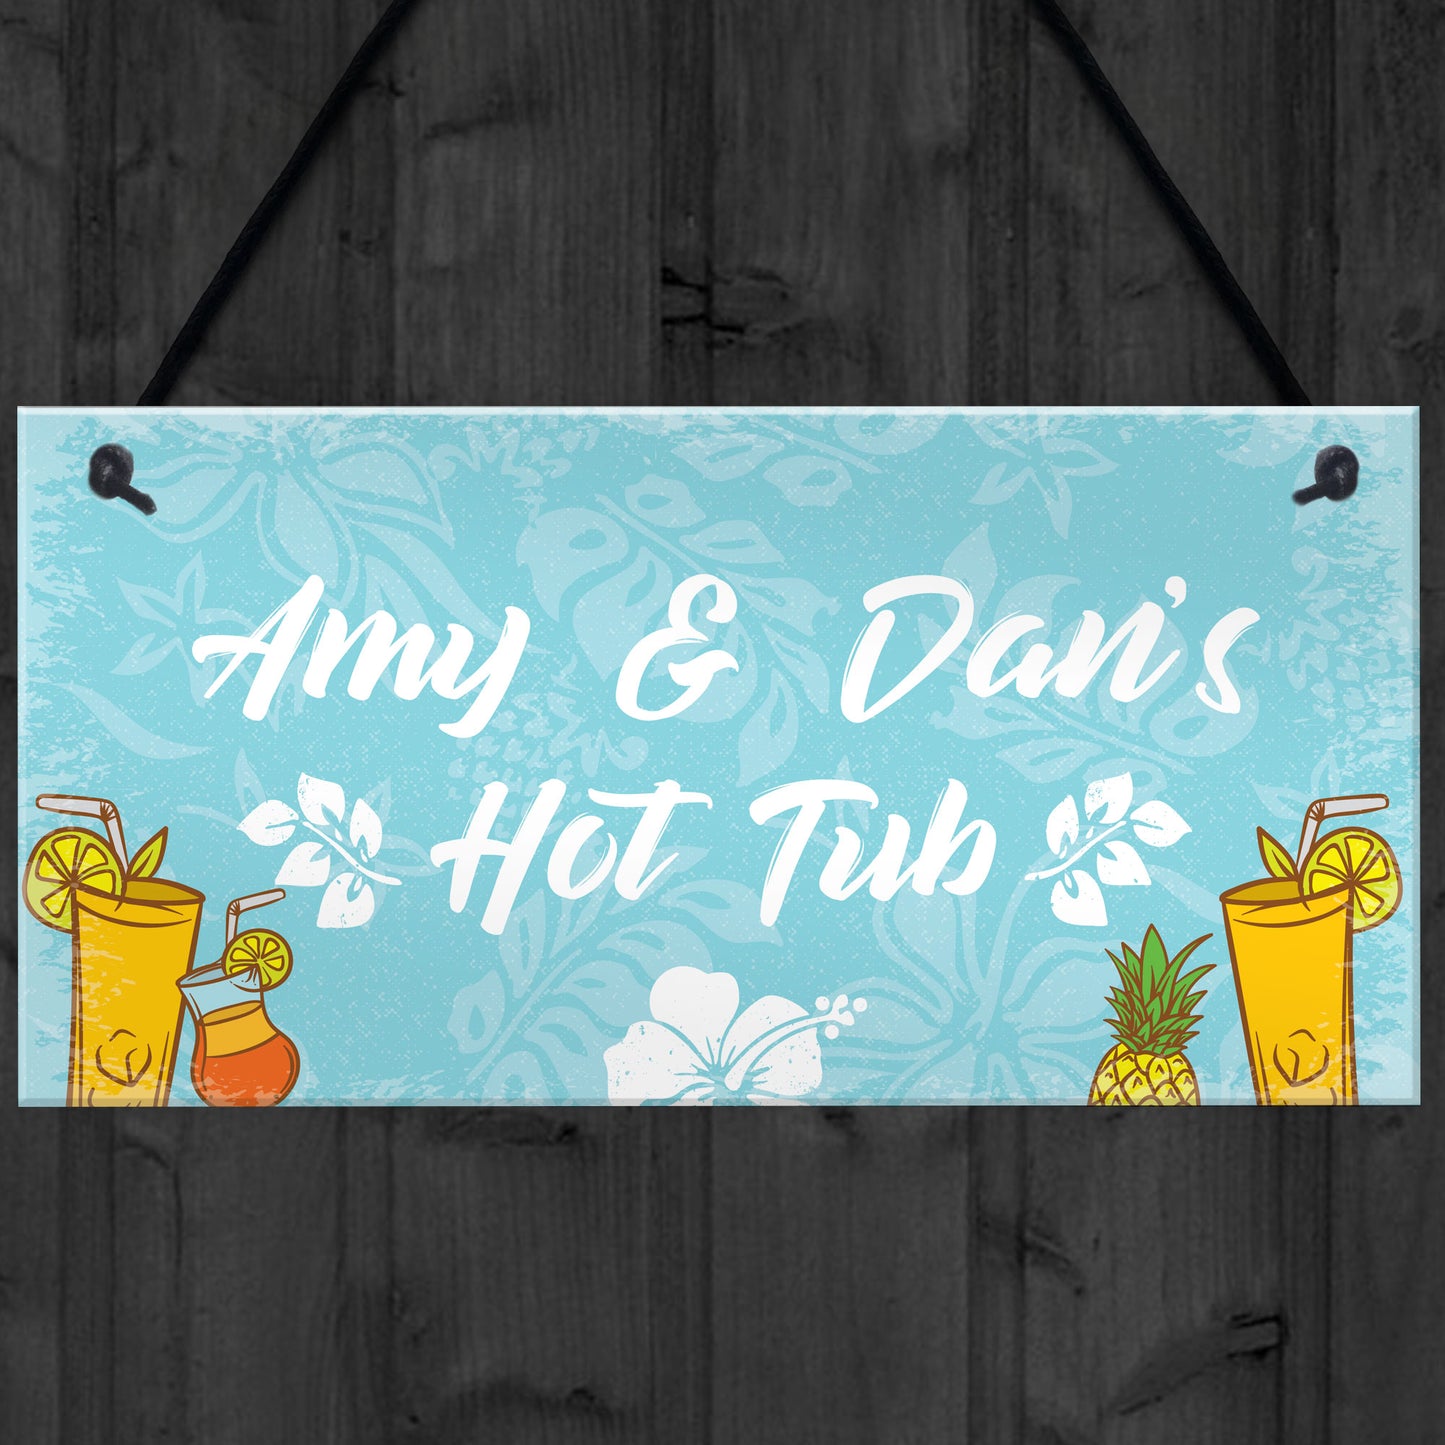 Personalised HOT TUB Accessories Novelty Hot Tub Plaque Garden